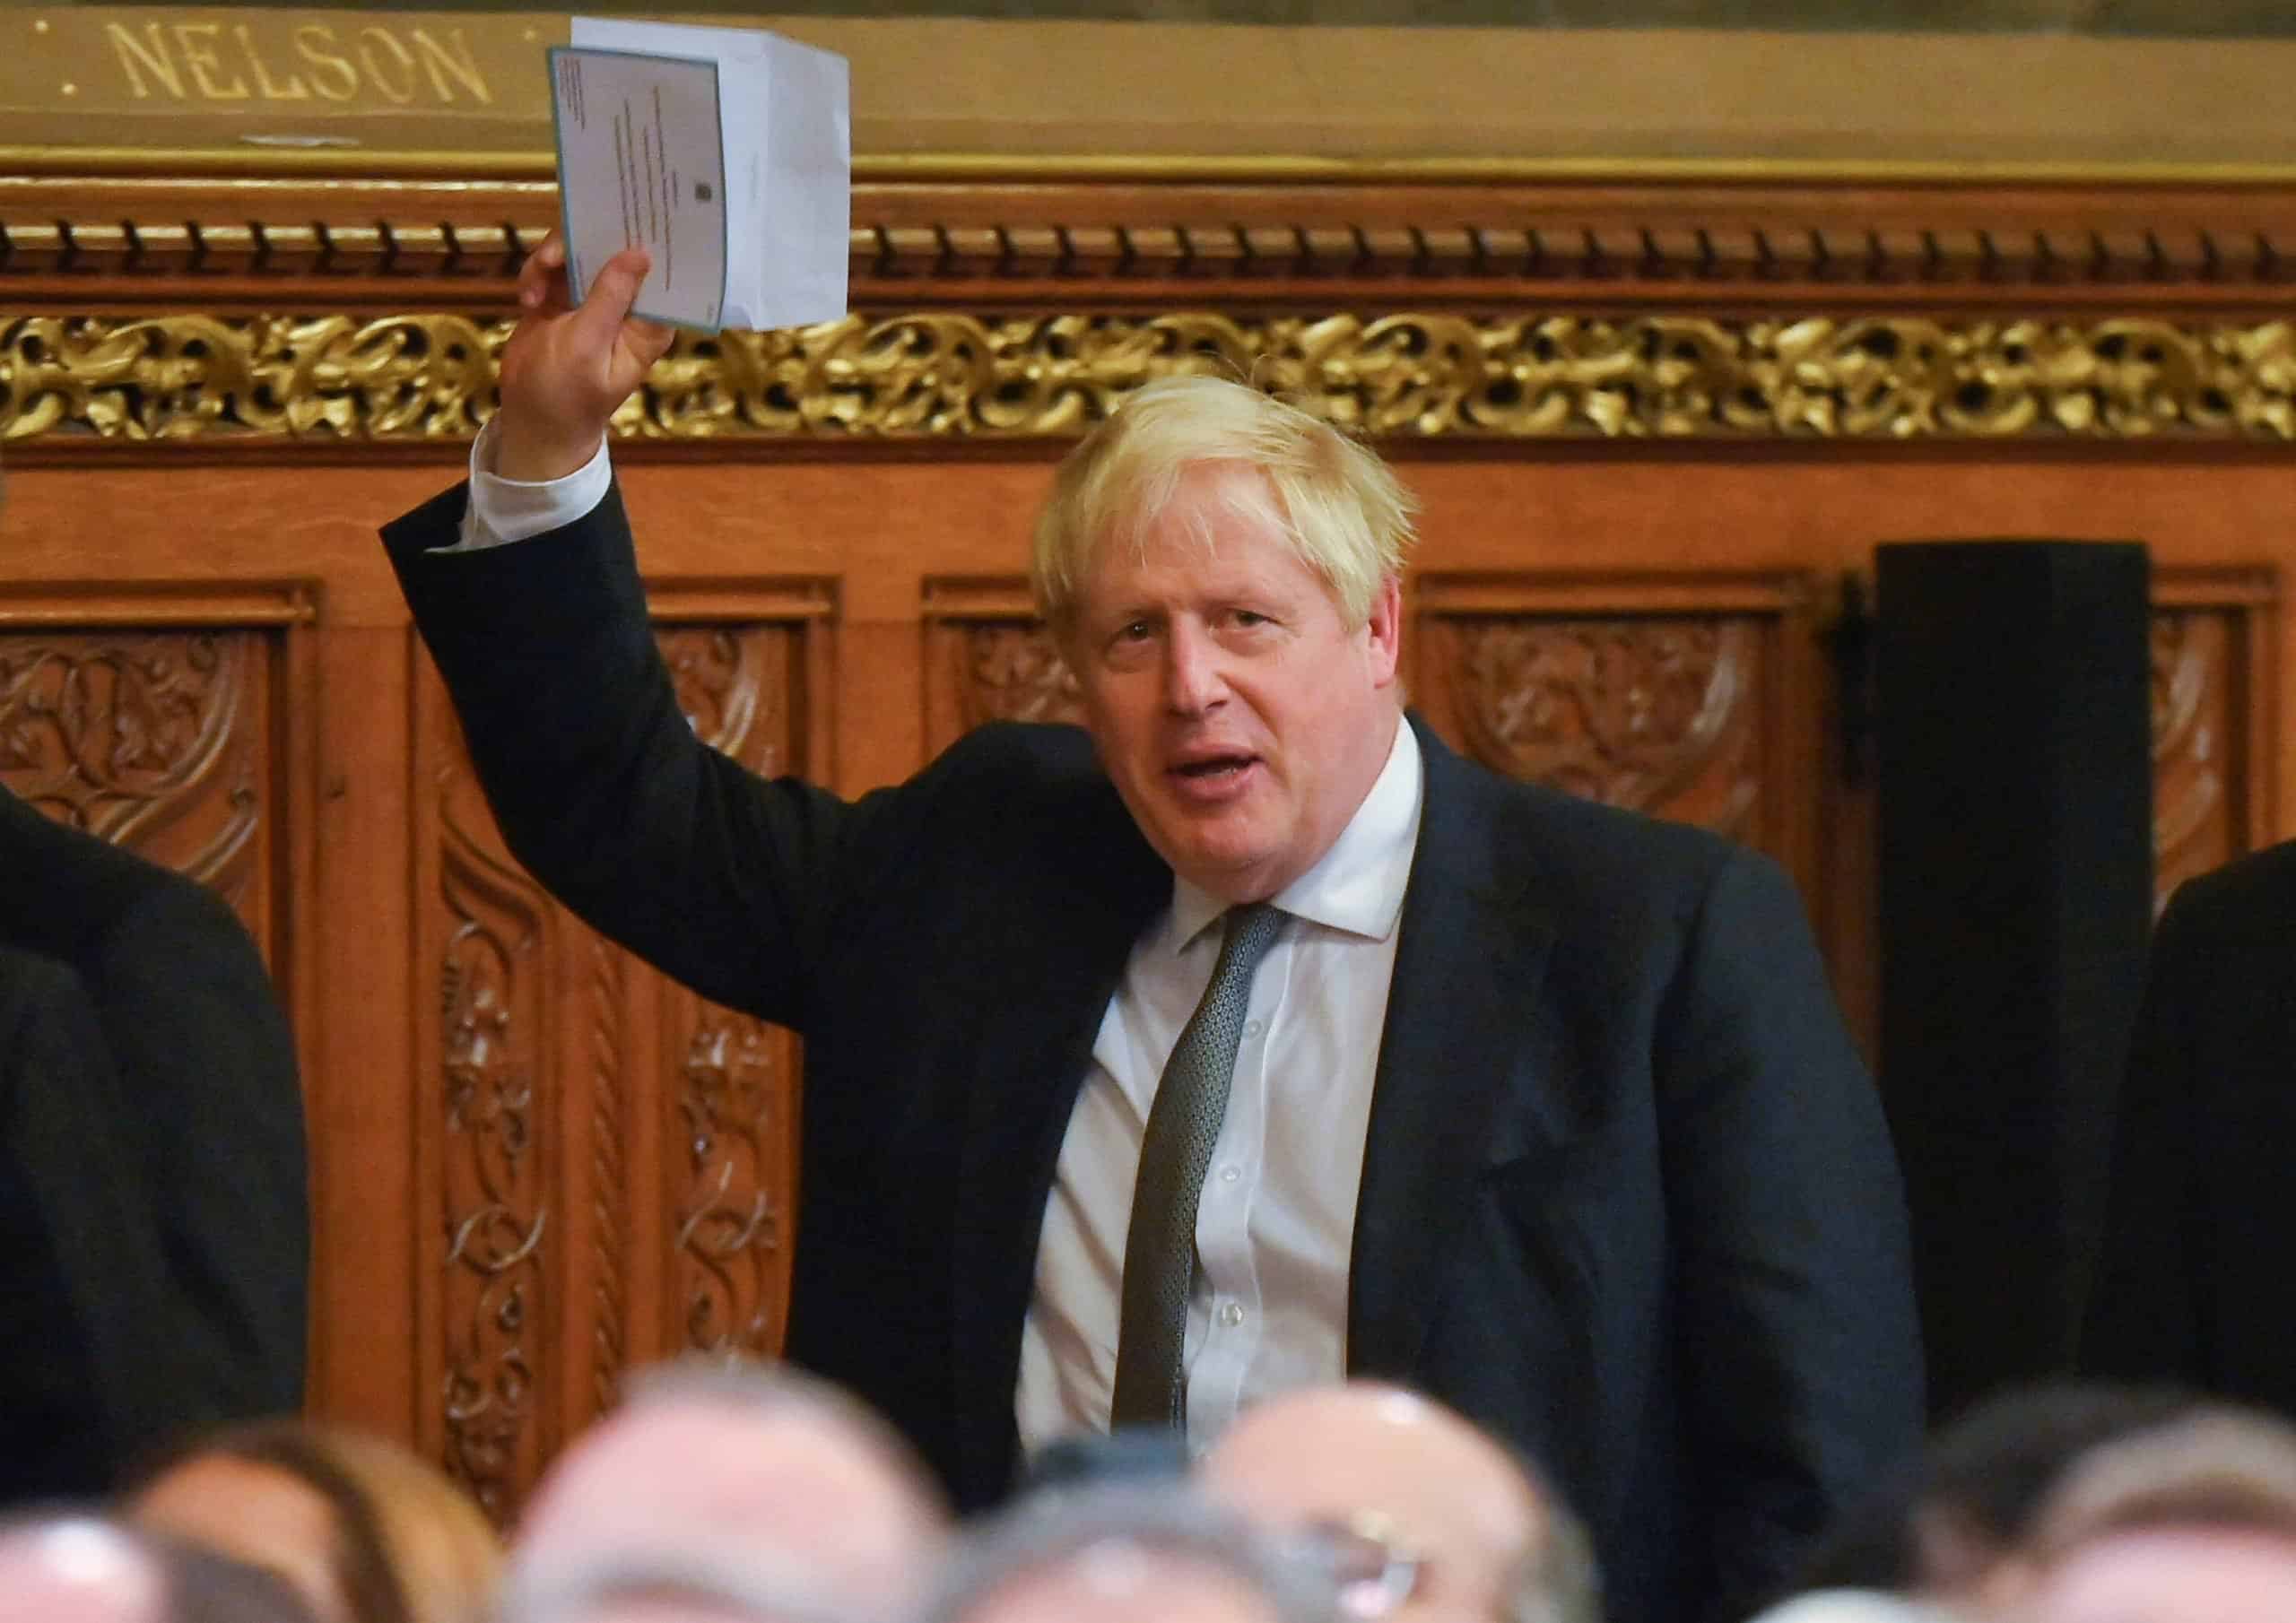 Johnson could be ‘back in charge by next Christmas’, Dorries says